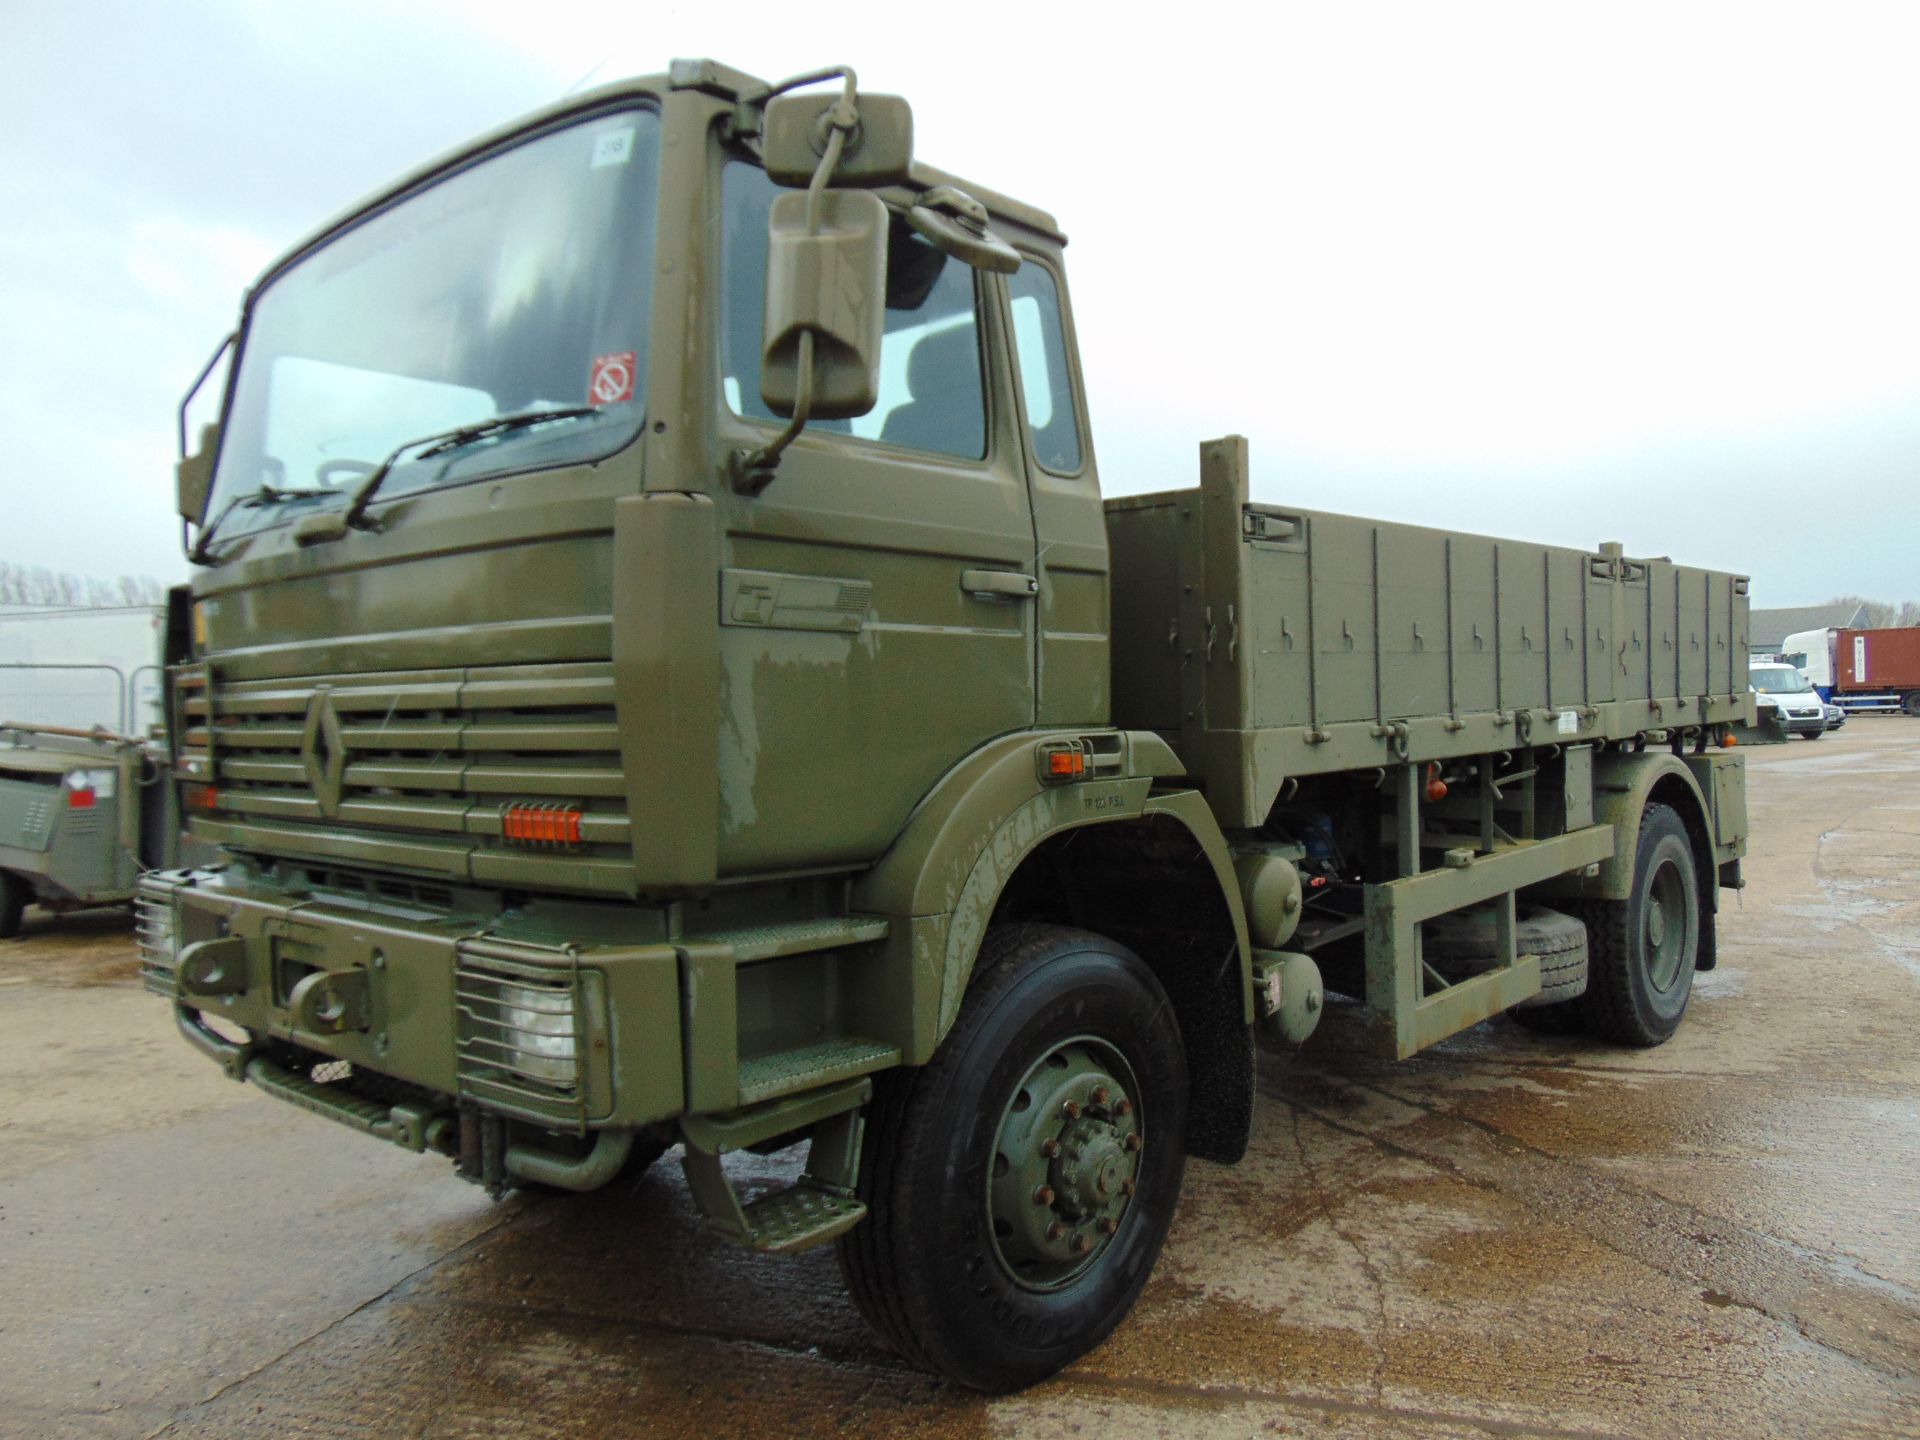 Renault G300 Maxter RHD 4x4 8T Cargo Truck with fitted winch which - Image 3 of 15